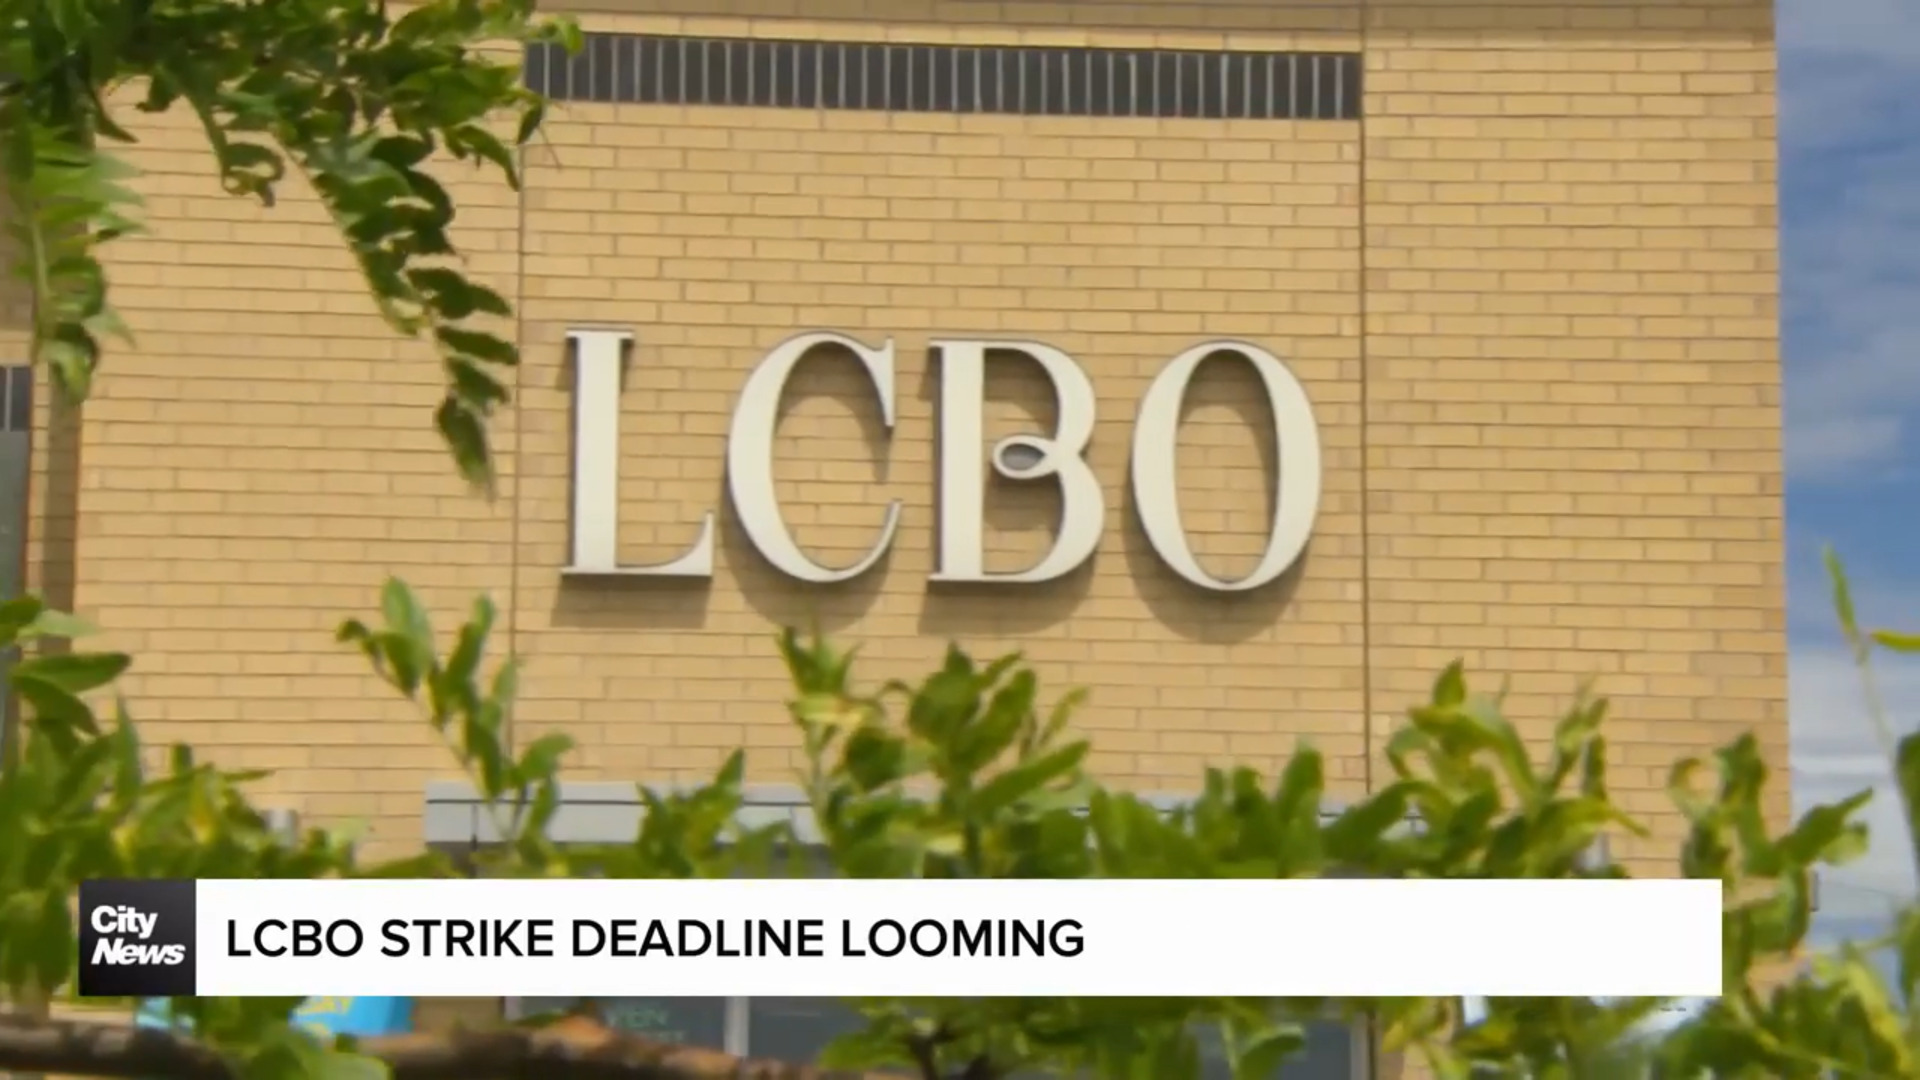 Negotiations continue between the LCBO and OPSEU